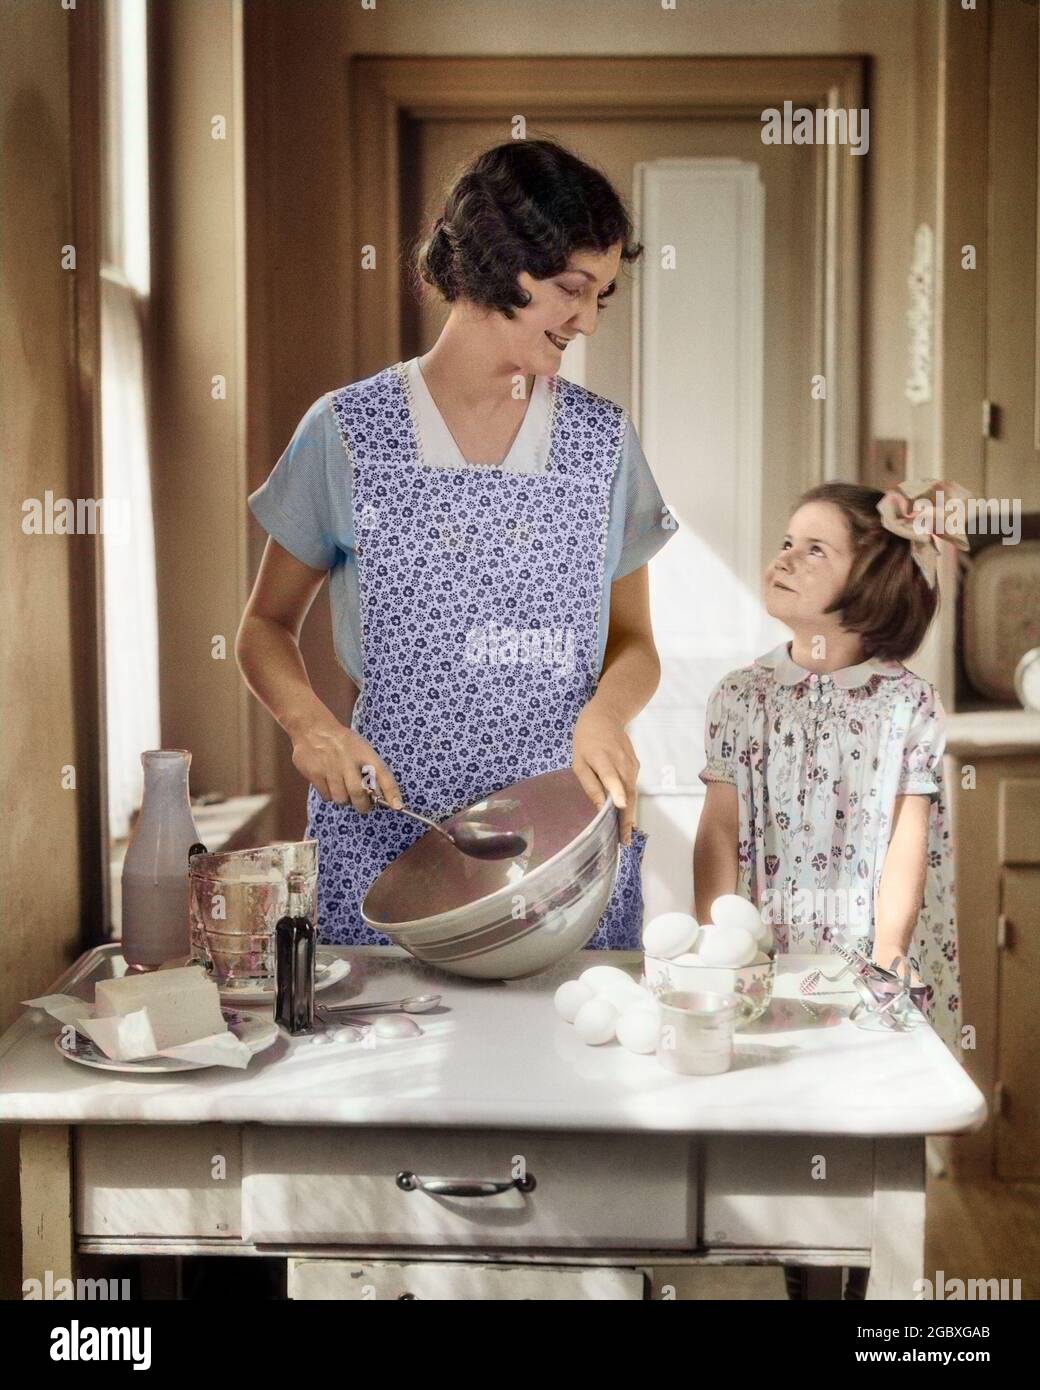 https://c8.alamy.com/comp/2GBXGAB/1920s-1930s-mother-with-mixing-bowl-in-kitchen-baking-with-daughter-h2535c-har001-hars-color-relationship-mothers-old-time-teaching-nostalgia-old-fashion-1-household-juvenile-style-mixing-pleased-joy-females-grownup-home-life-half-length-ladies-daughters-persons-grown-up-caring-ingredients-people-story-happiness-cheerful-stirring-smiles-joyful-stylish-juveniles-mid-adult-woman-moms-youngster-caucasian-ethnicity-har001-old-fashioned-2GBXGAB.jpg